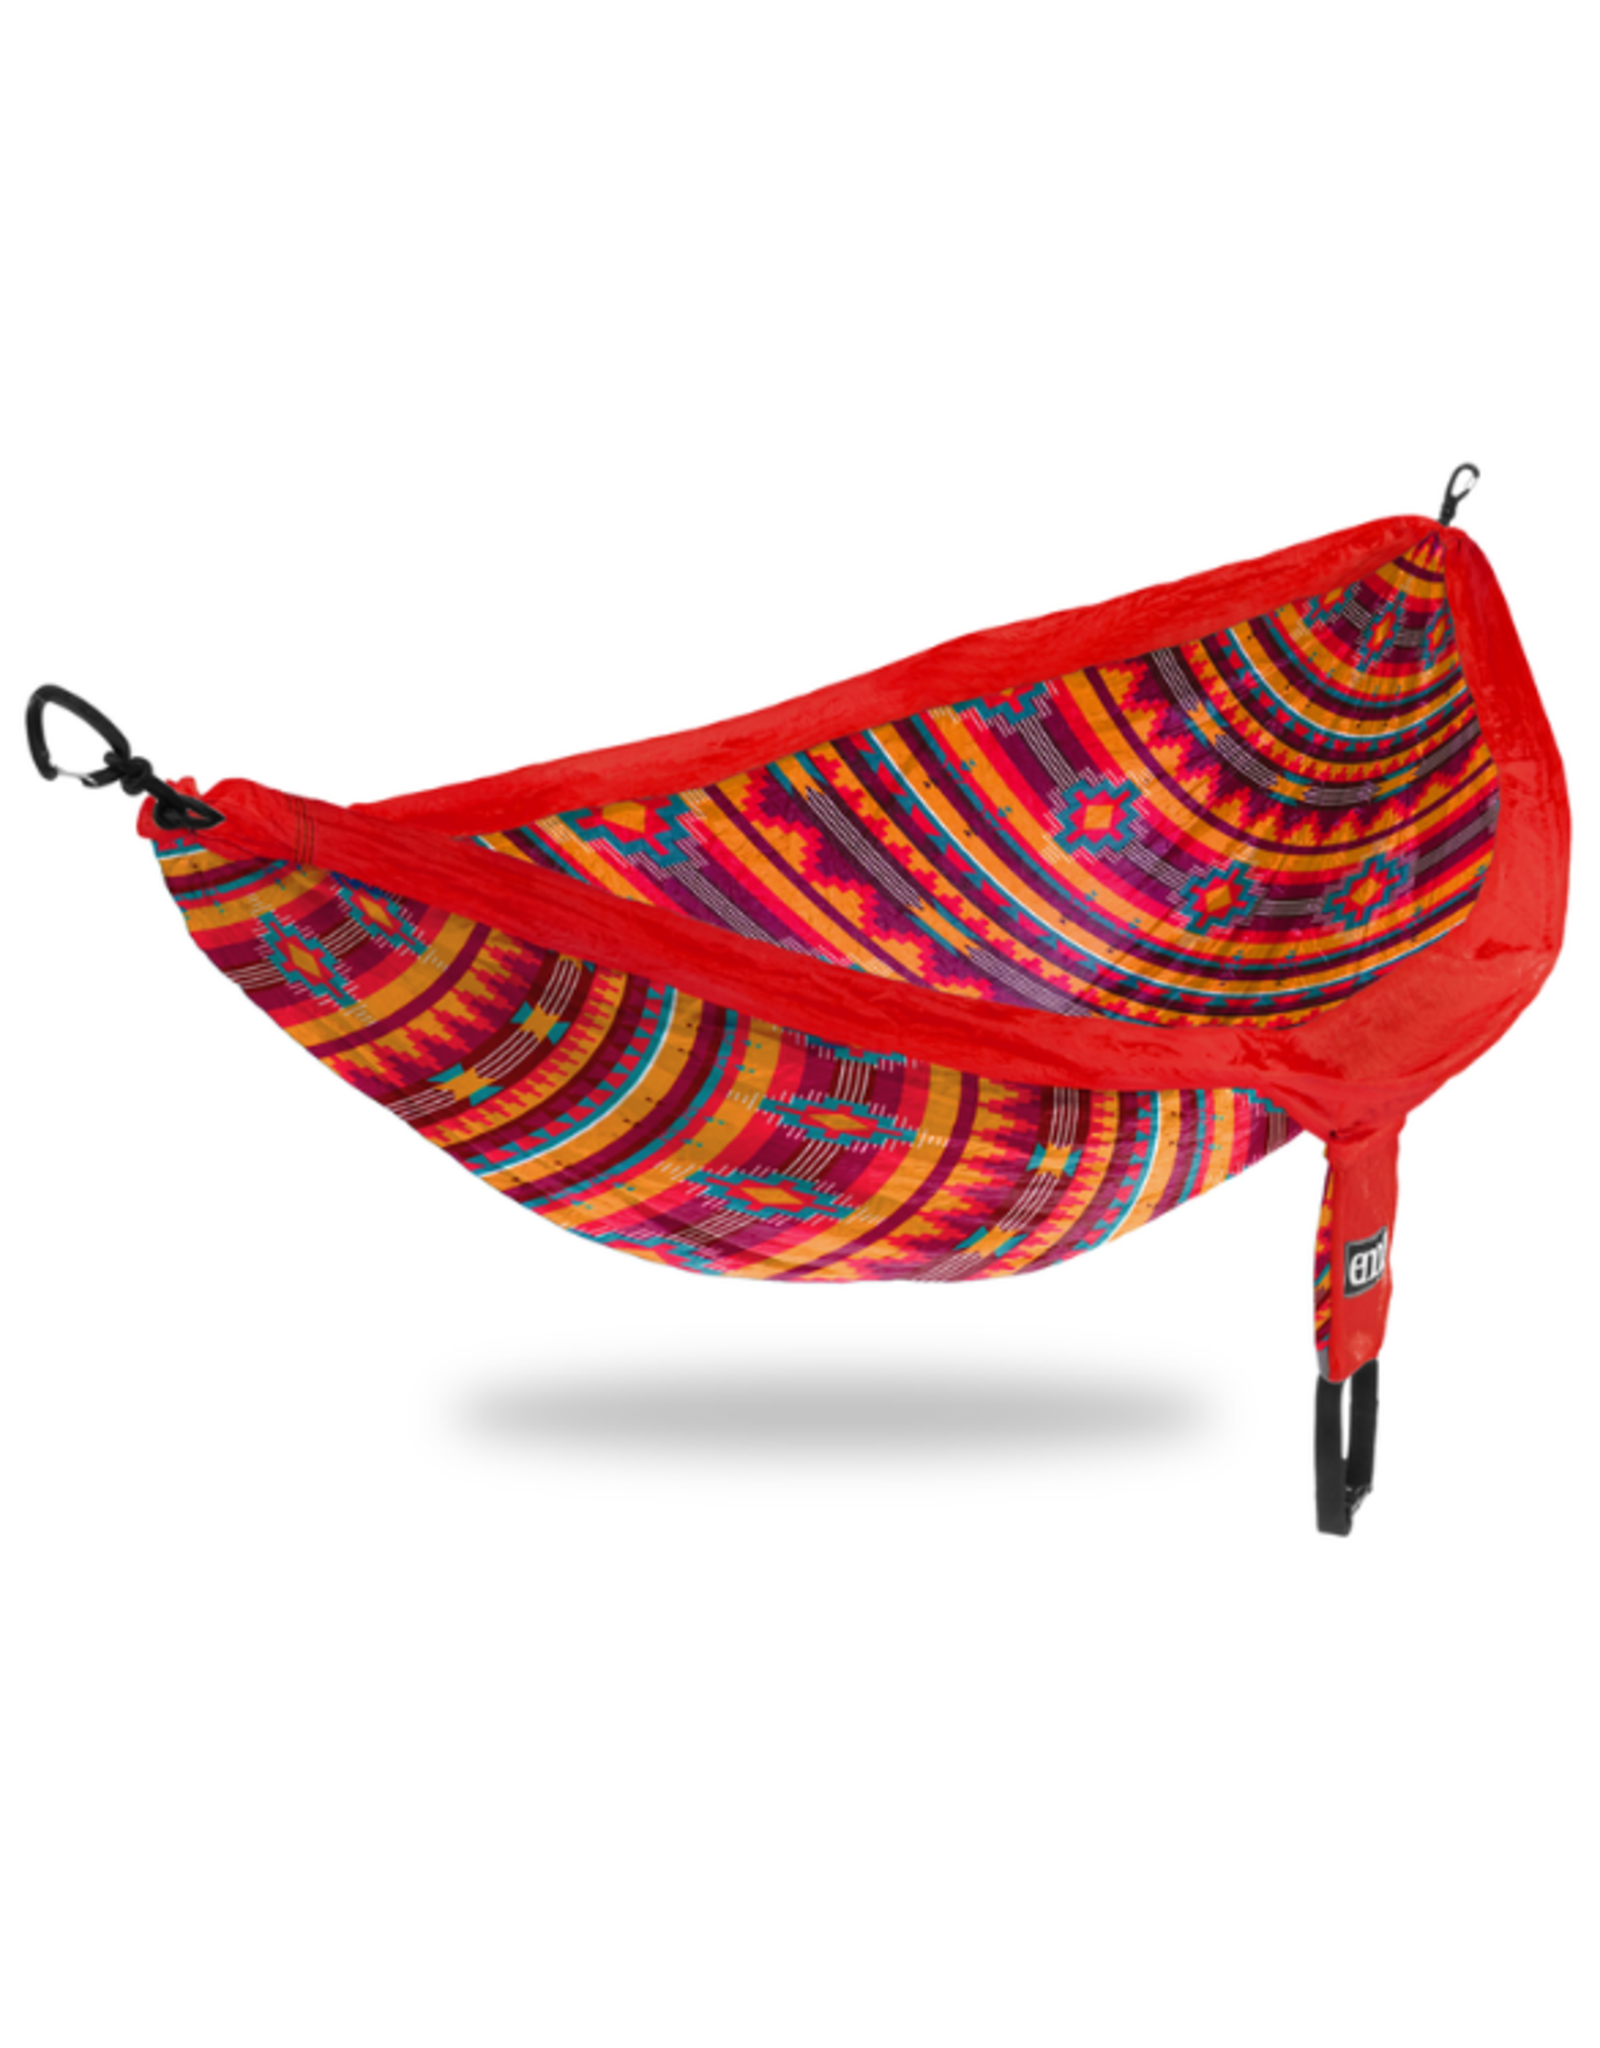 Eagles Nest Outfitters ENO DoubleNest Print Hammock